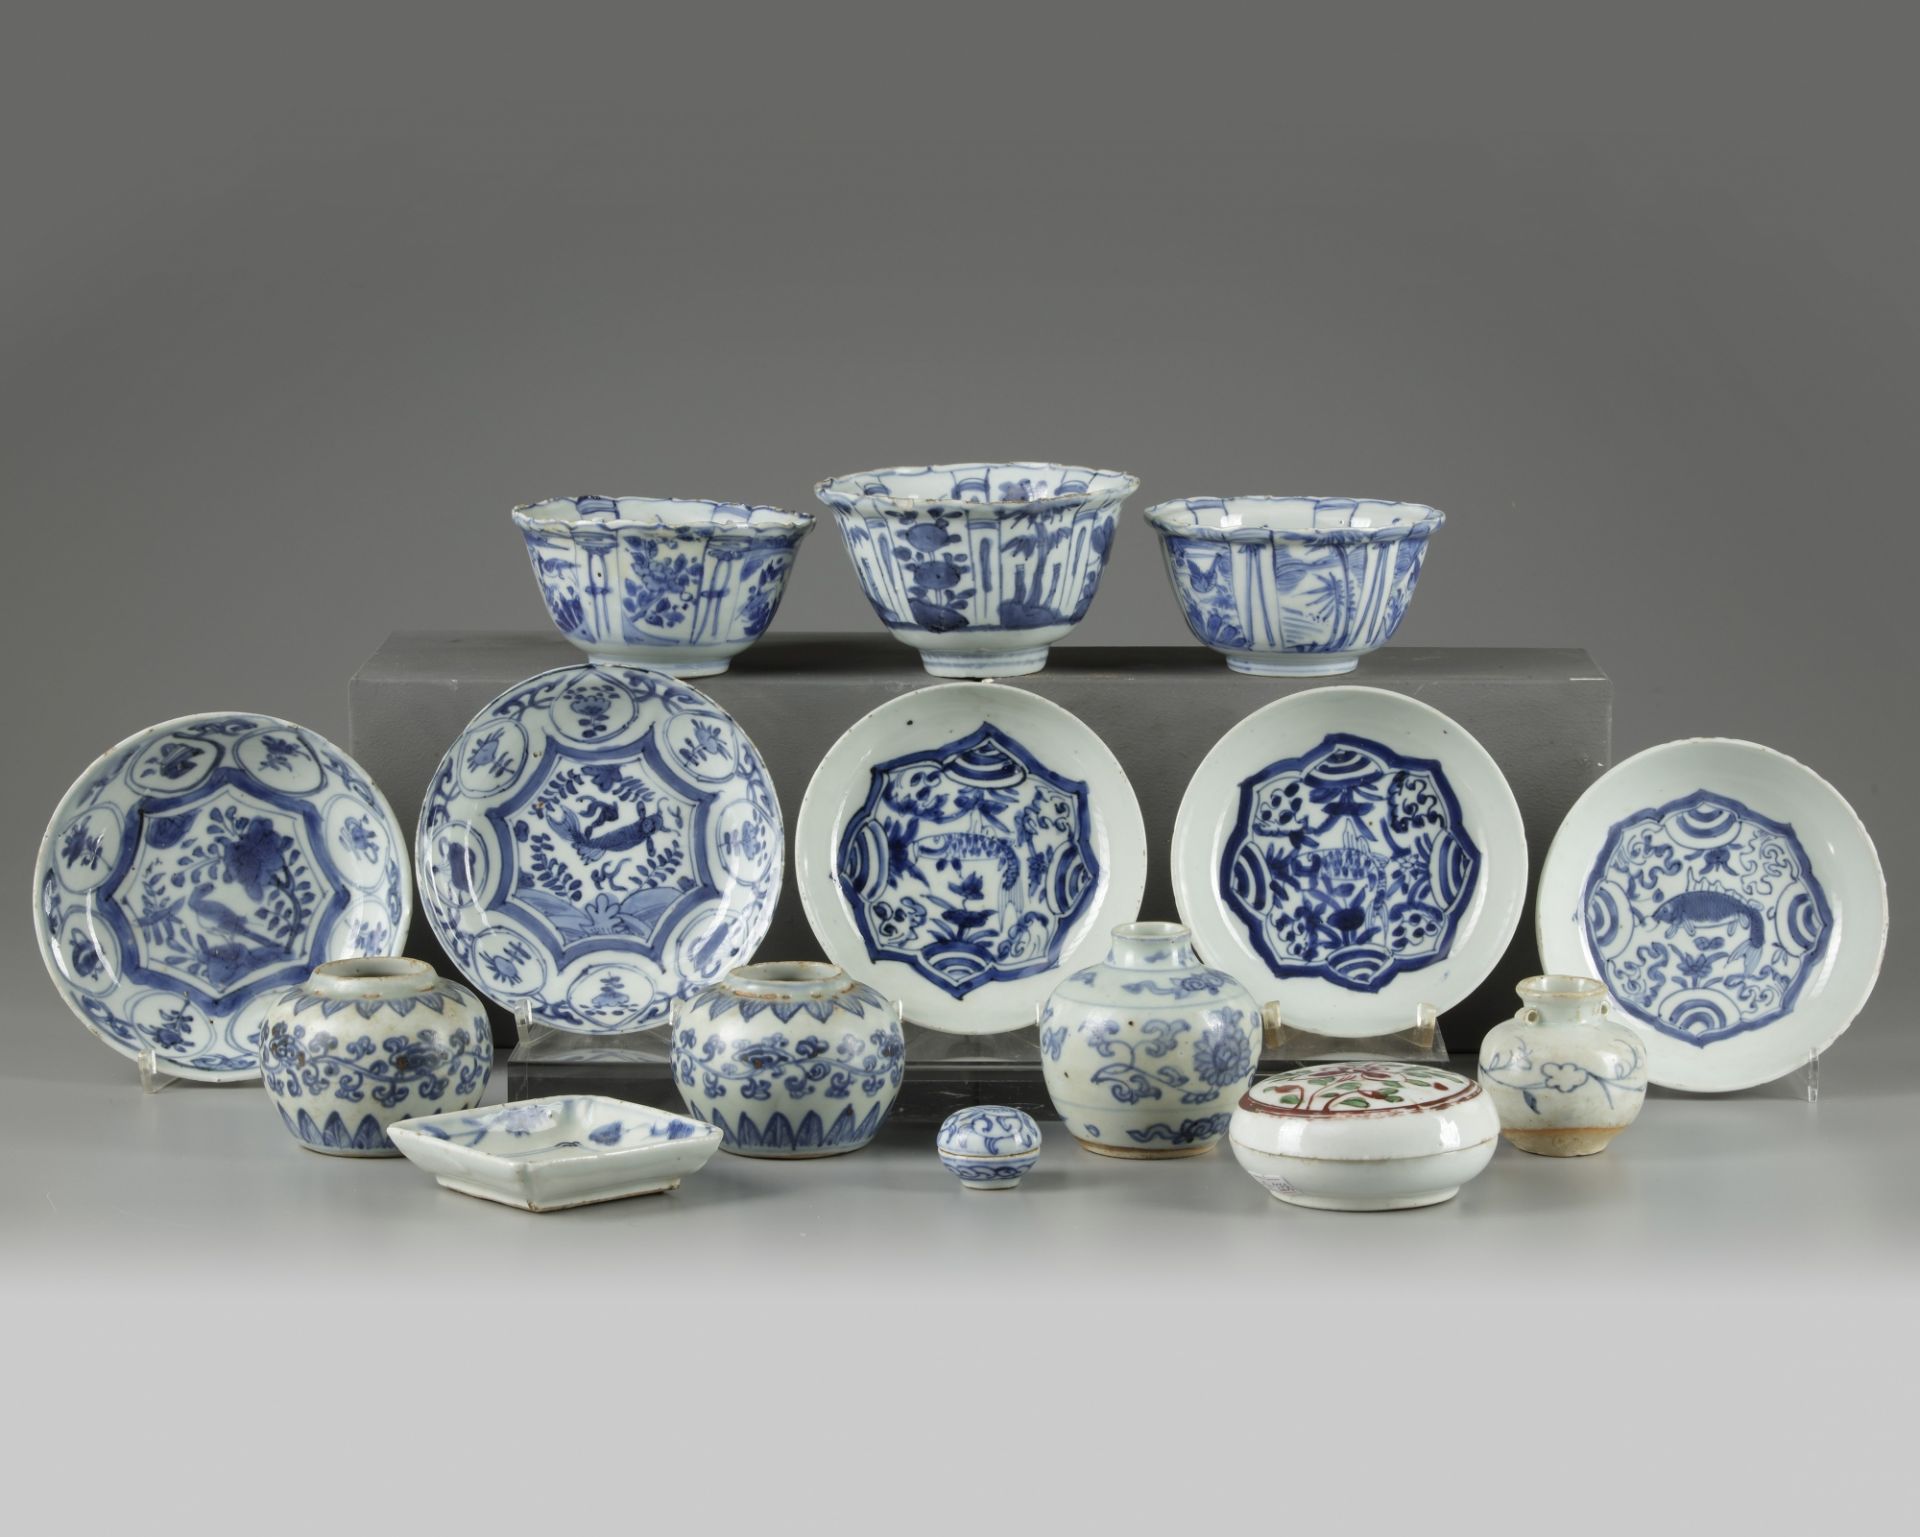 A group of fifteen Chinese porcelain vessels